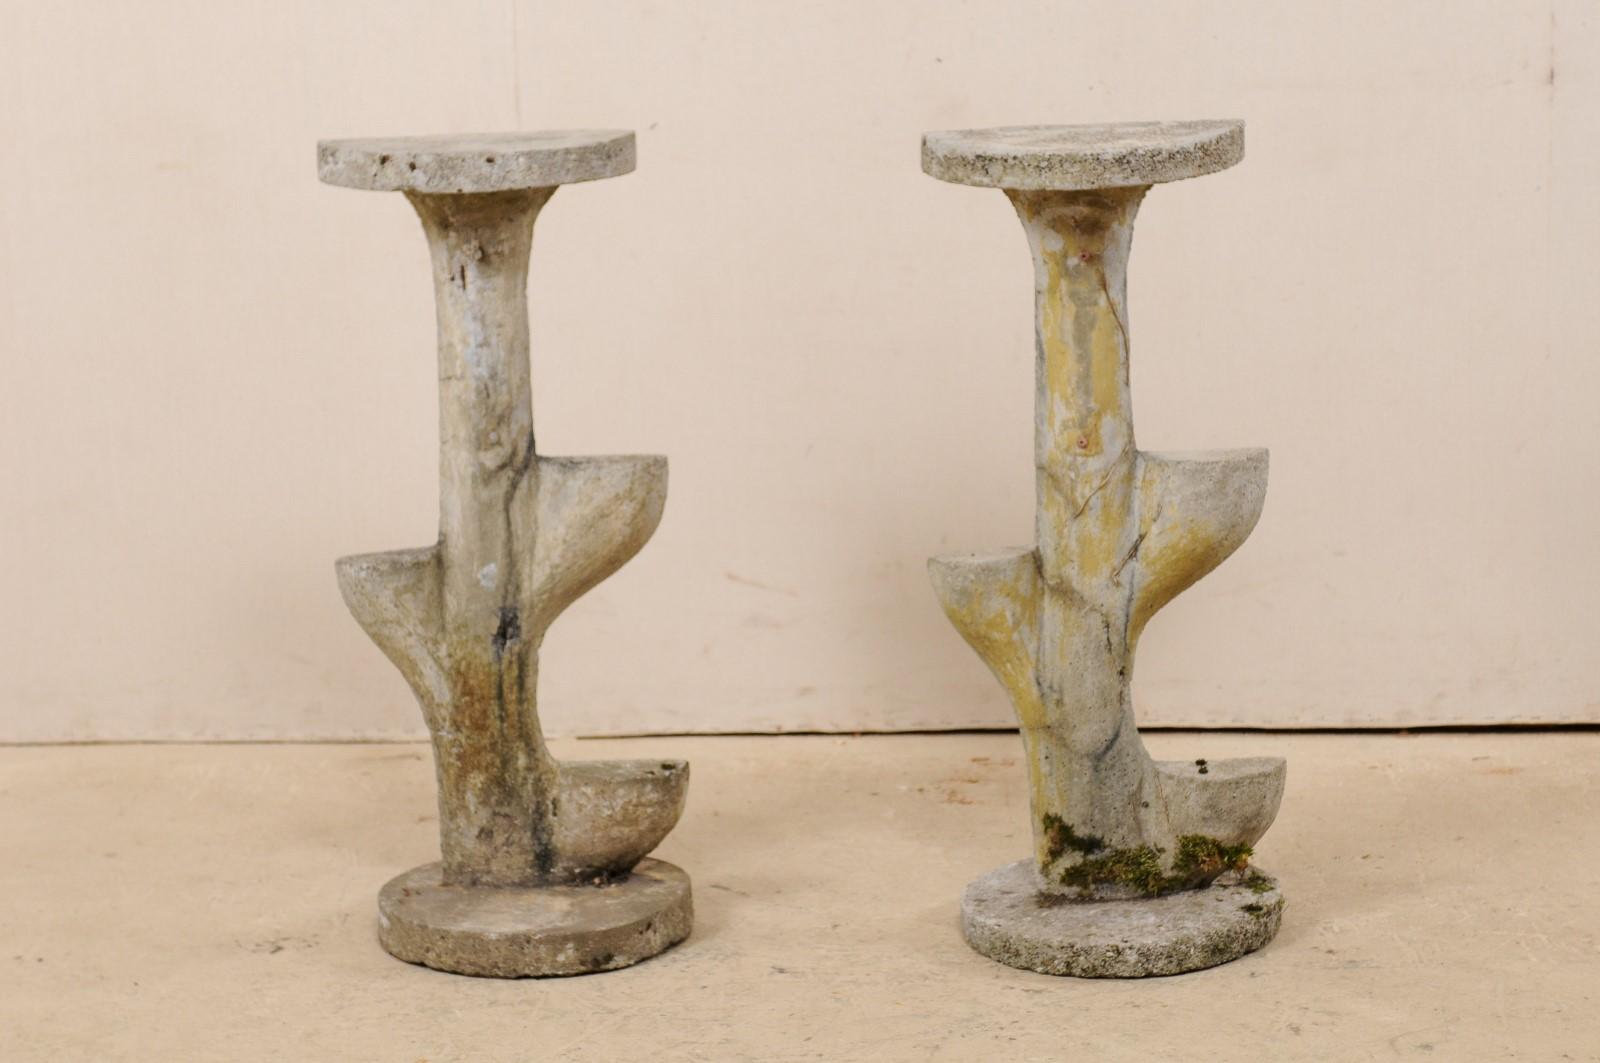 A French pair of garden foliage inspired, tiered sculptural shelves from the mid-20th century. This vintage pair of cast-stone garden or patio decorations from France each features a rounded base which supports a plant shaped sculpture, topped with